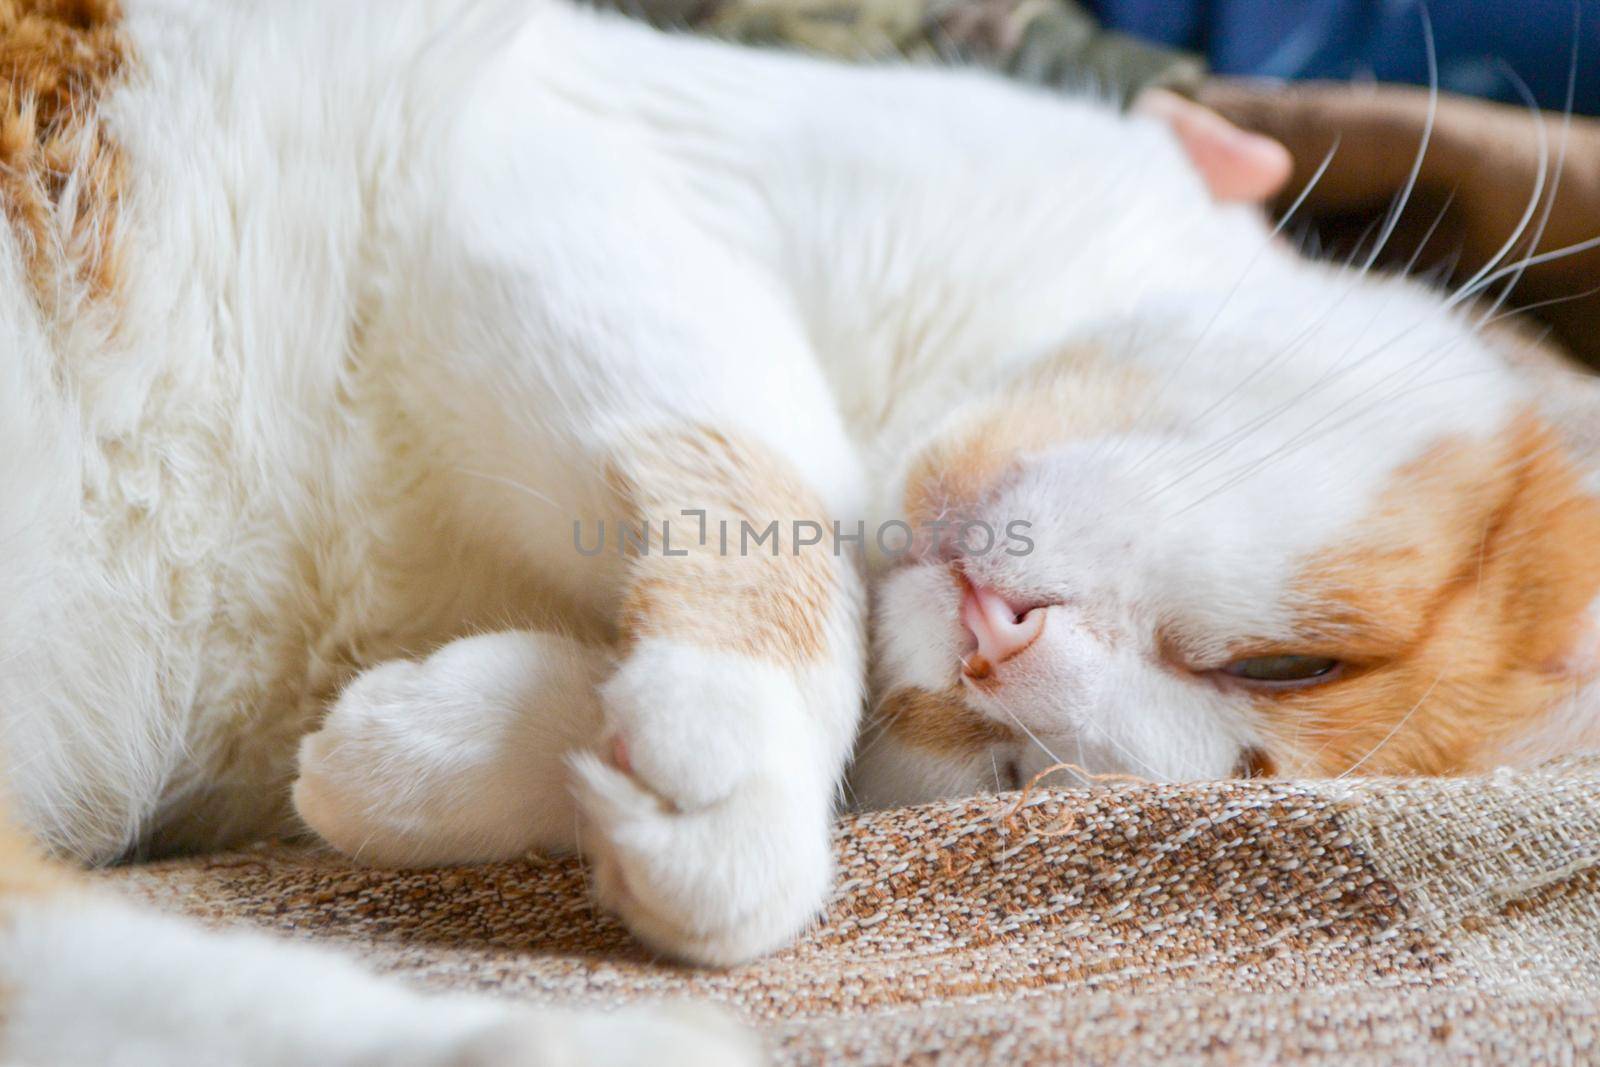 Red cat with white spots sleepy. The close up view of relax red cat by milastokerpro